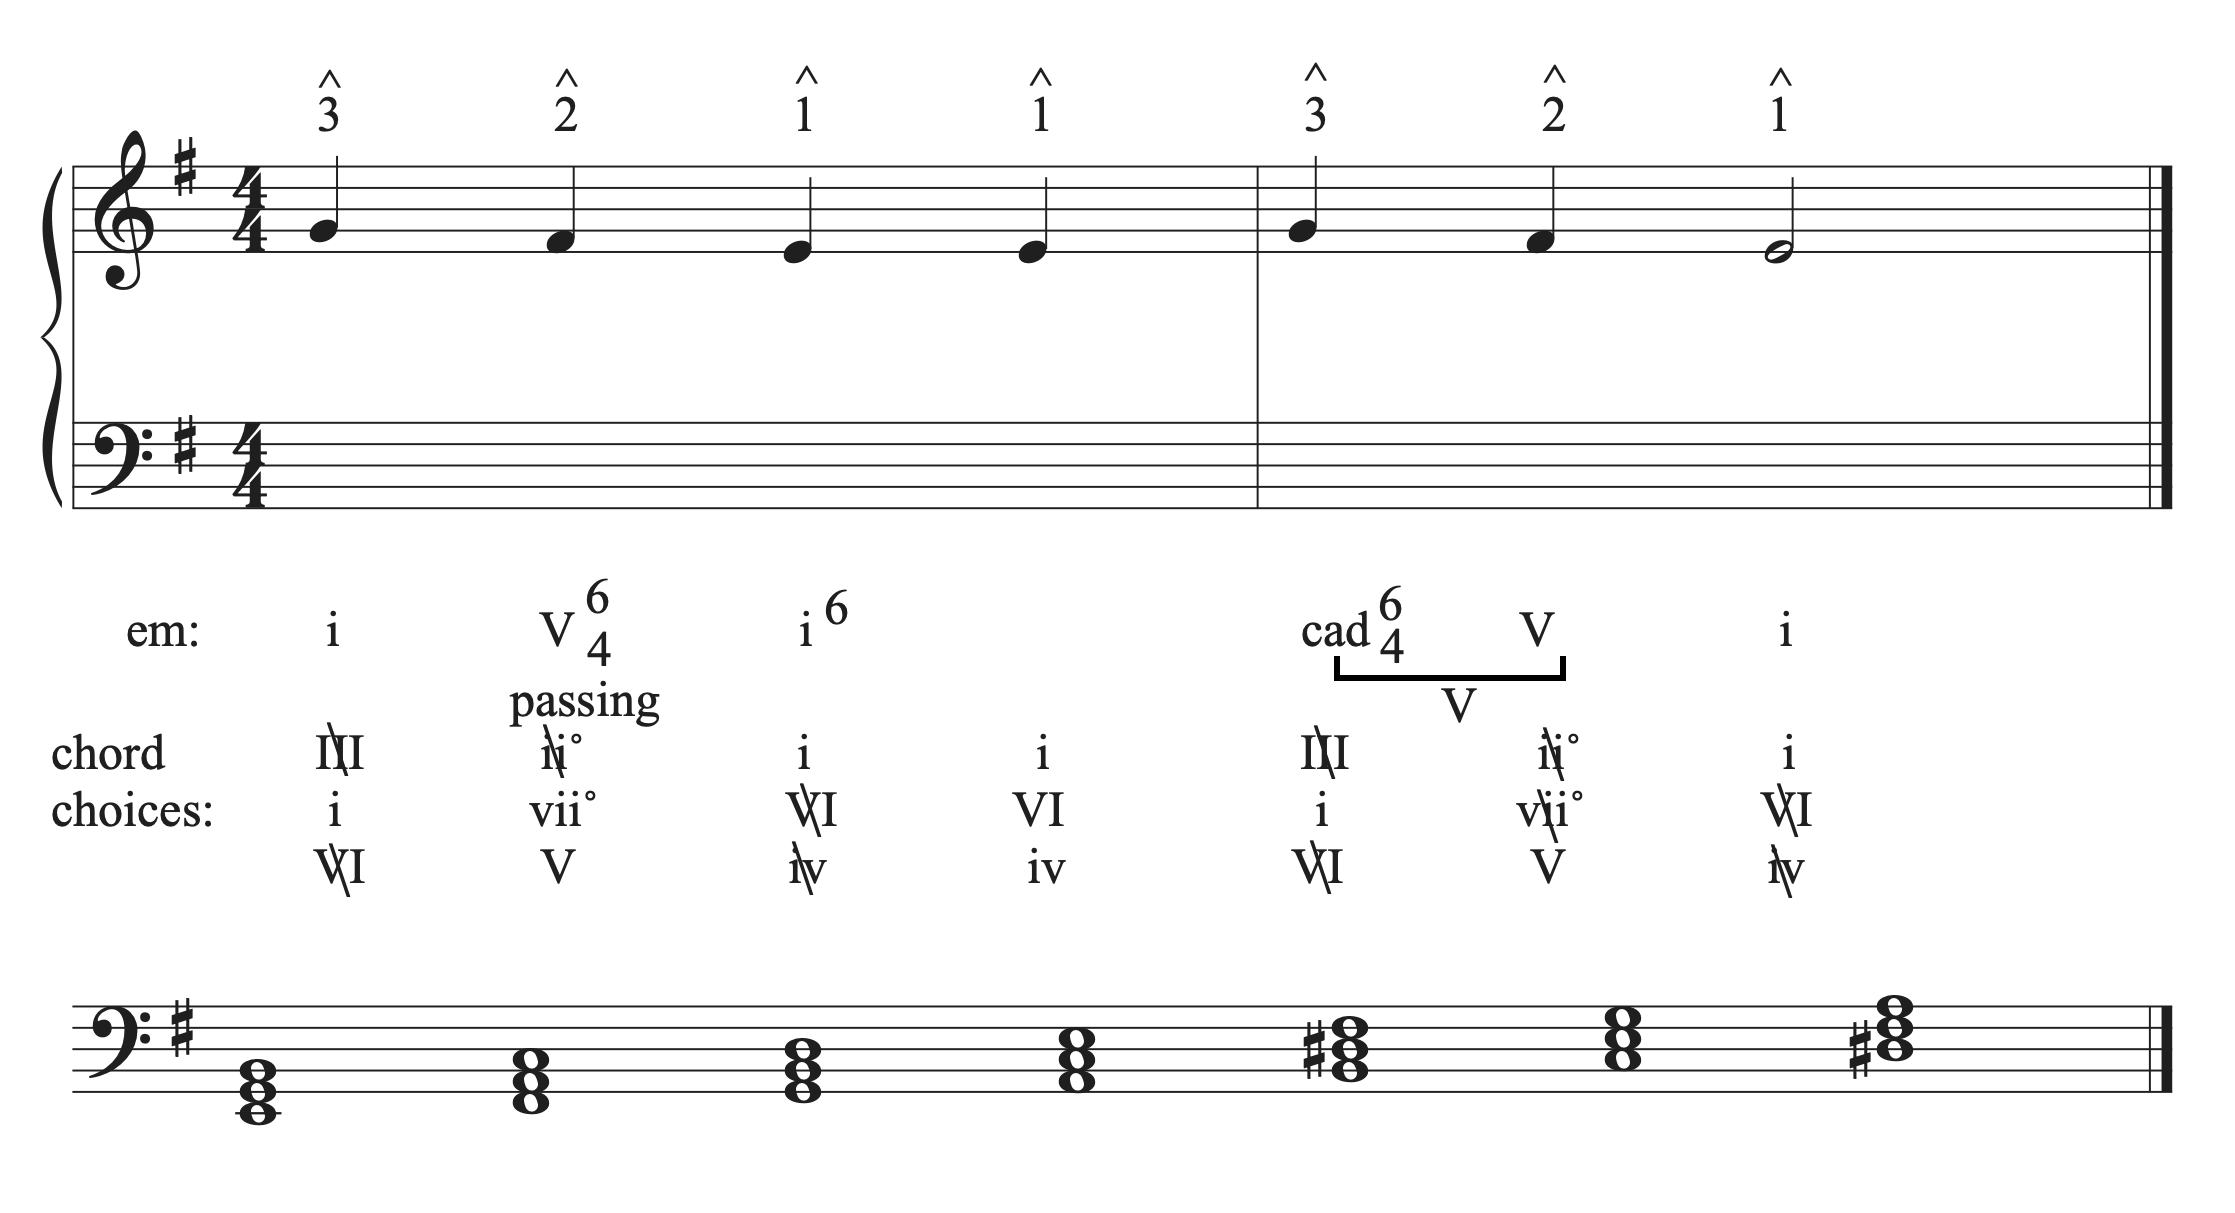 The musical example in G major with a chosen chord progression.